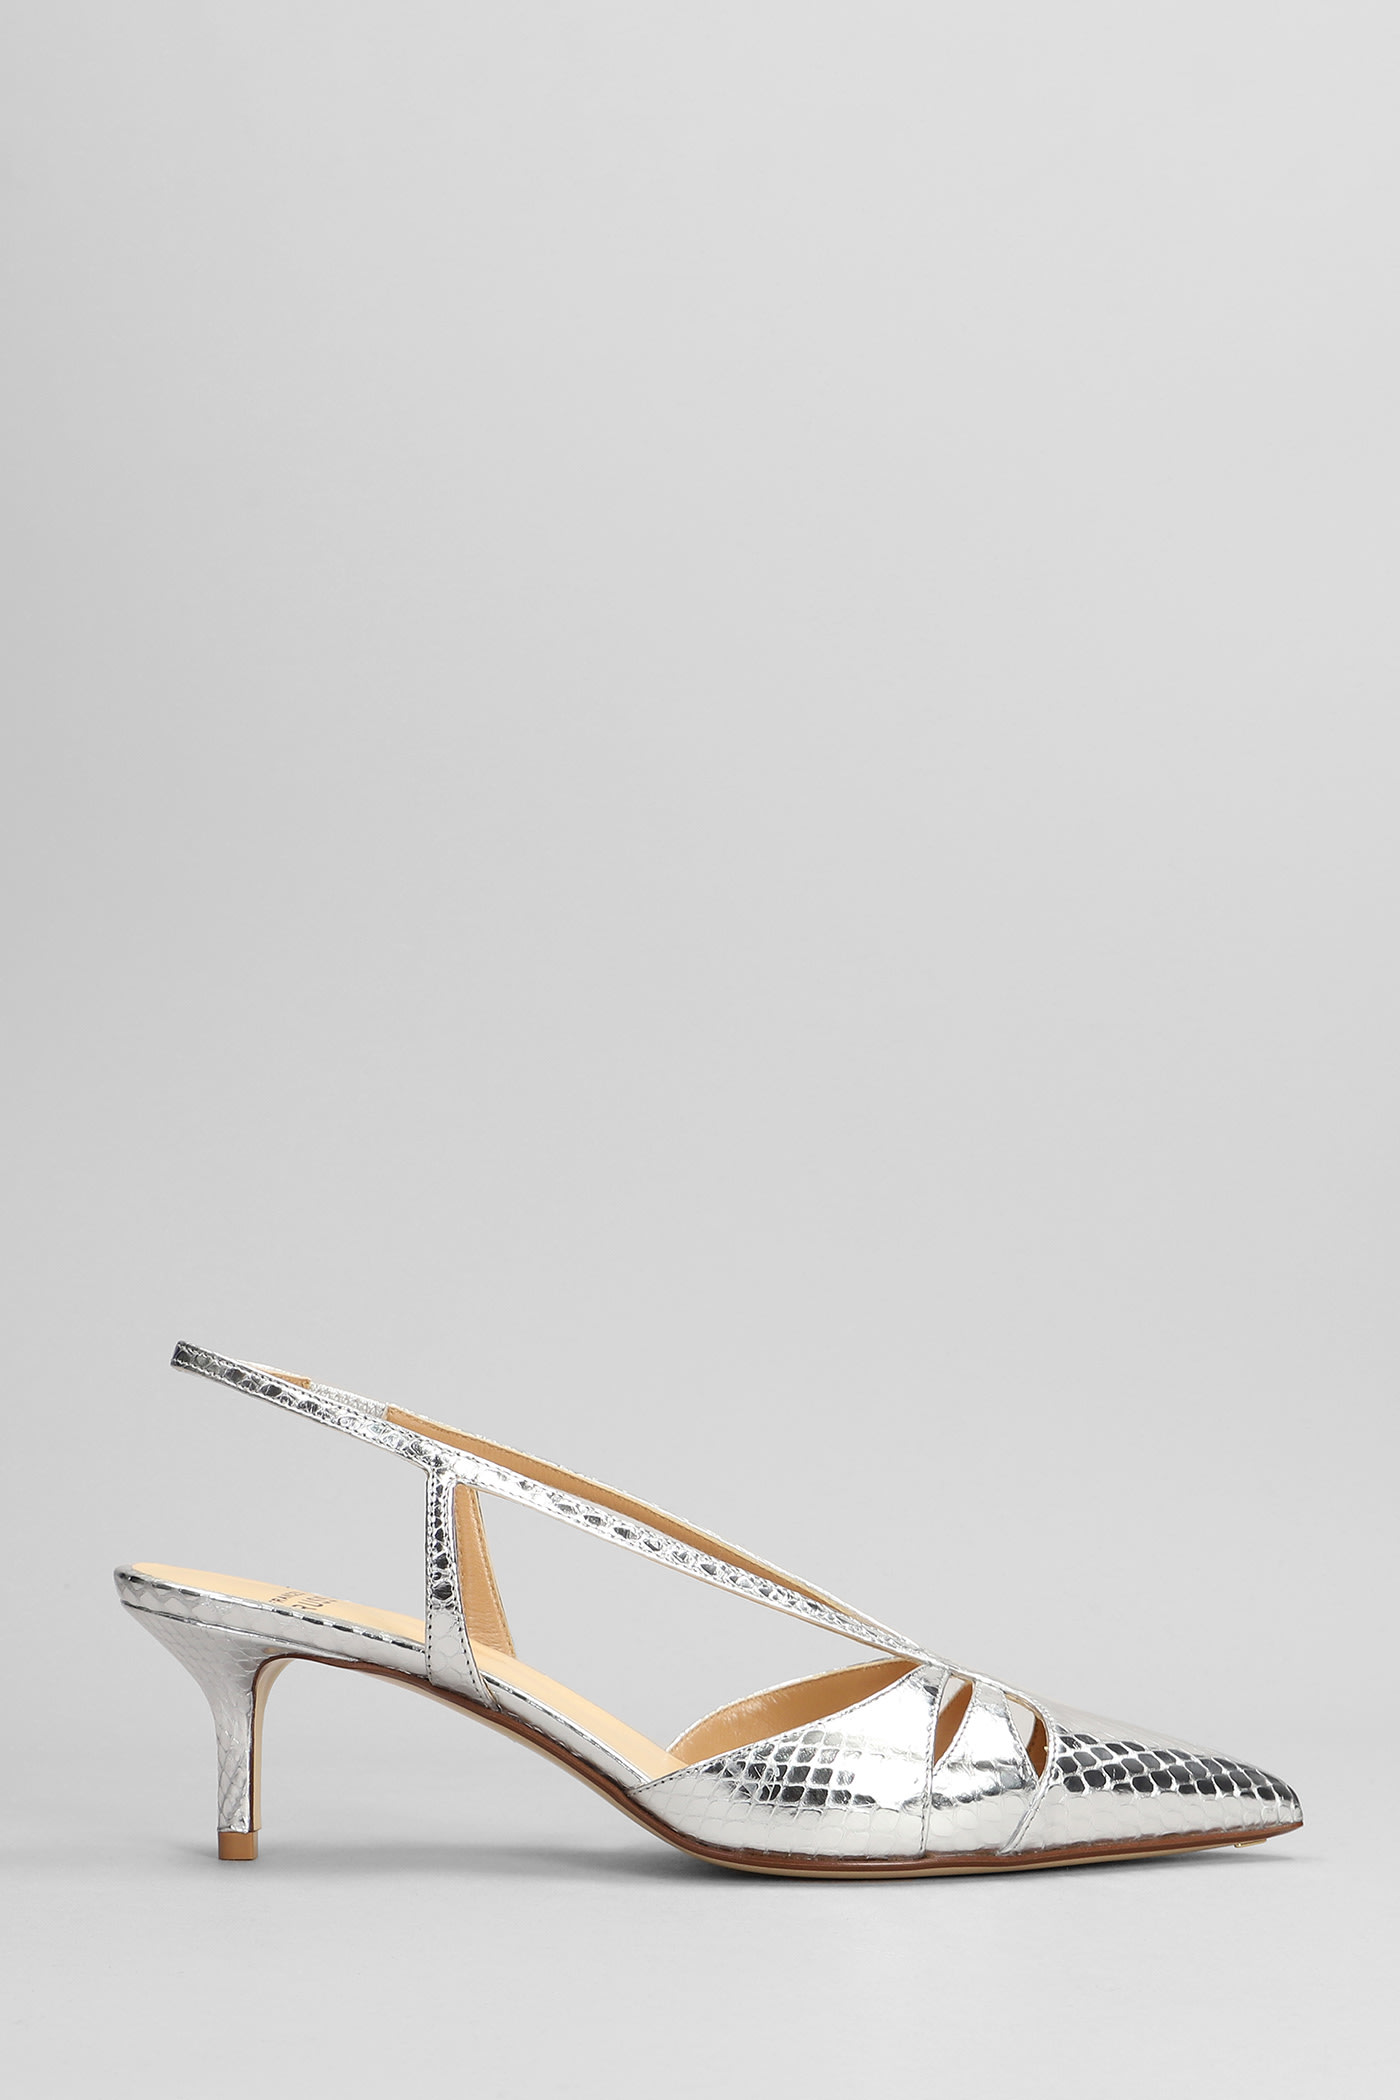 FRANCESCO RUSSO PUMPS IN SILVER LEATHER